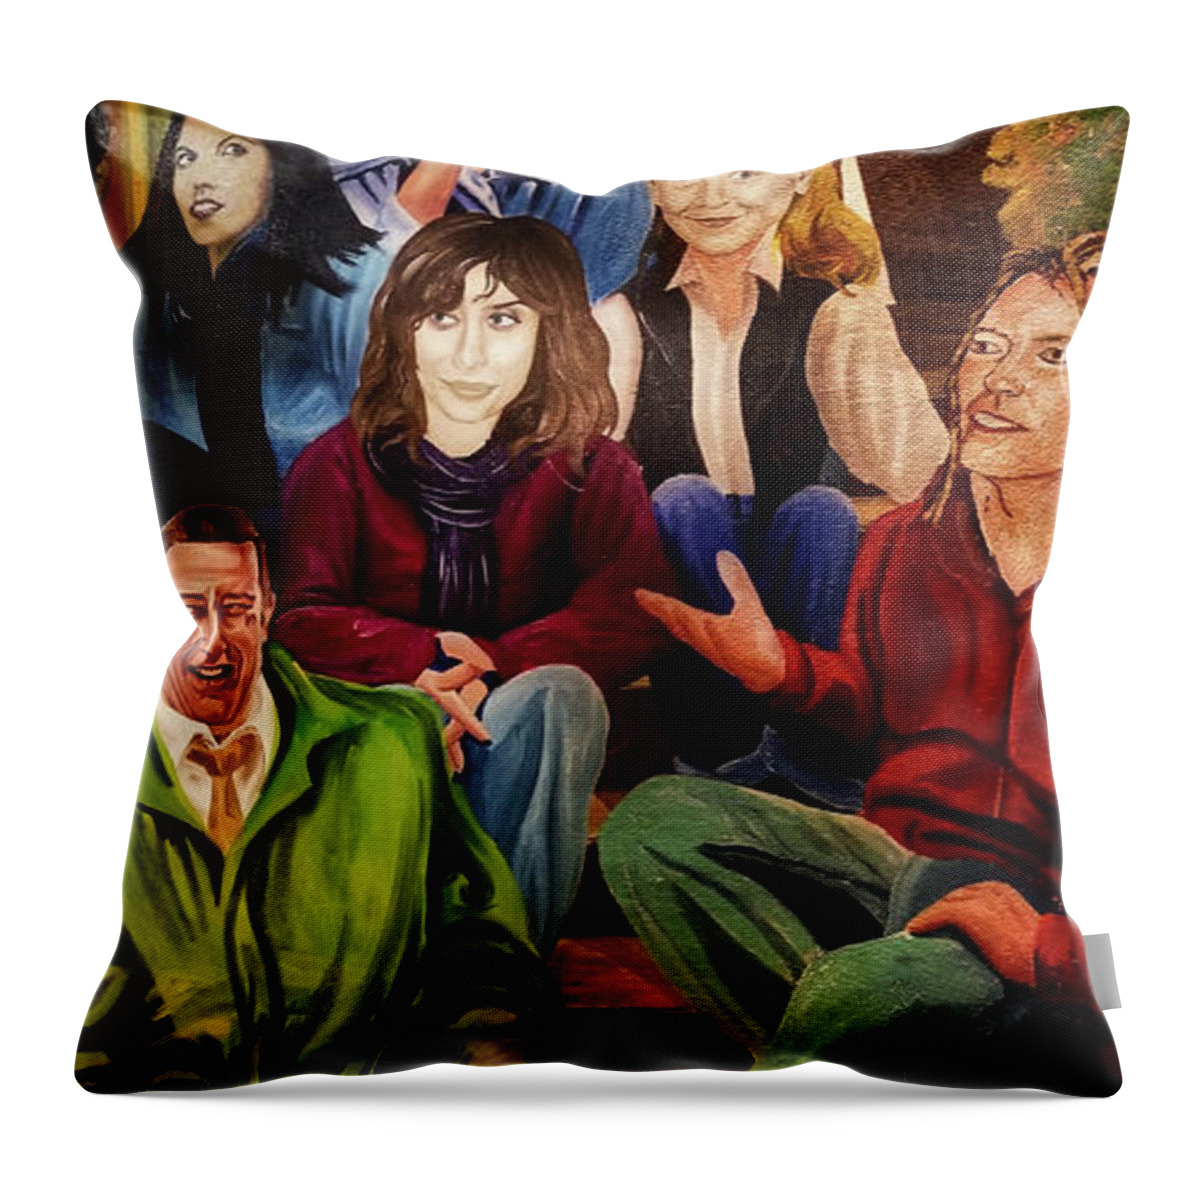 Mural Throw Pillow featuring the photograph The Jury by Gene Taylor